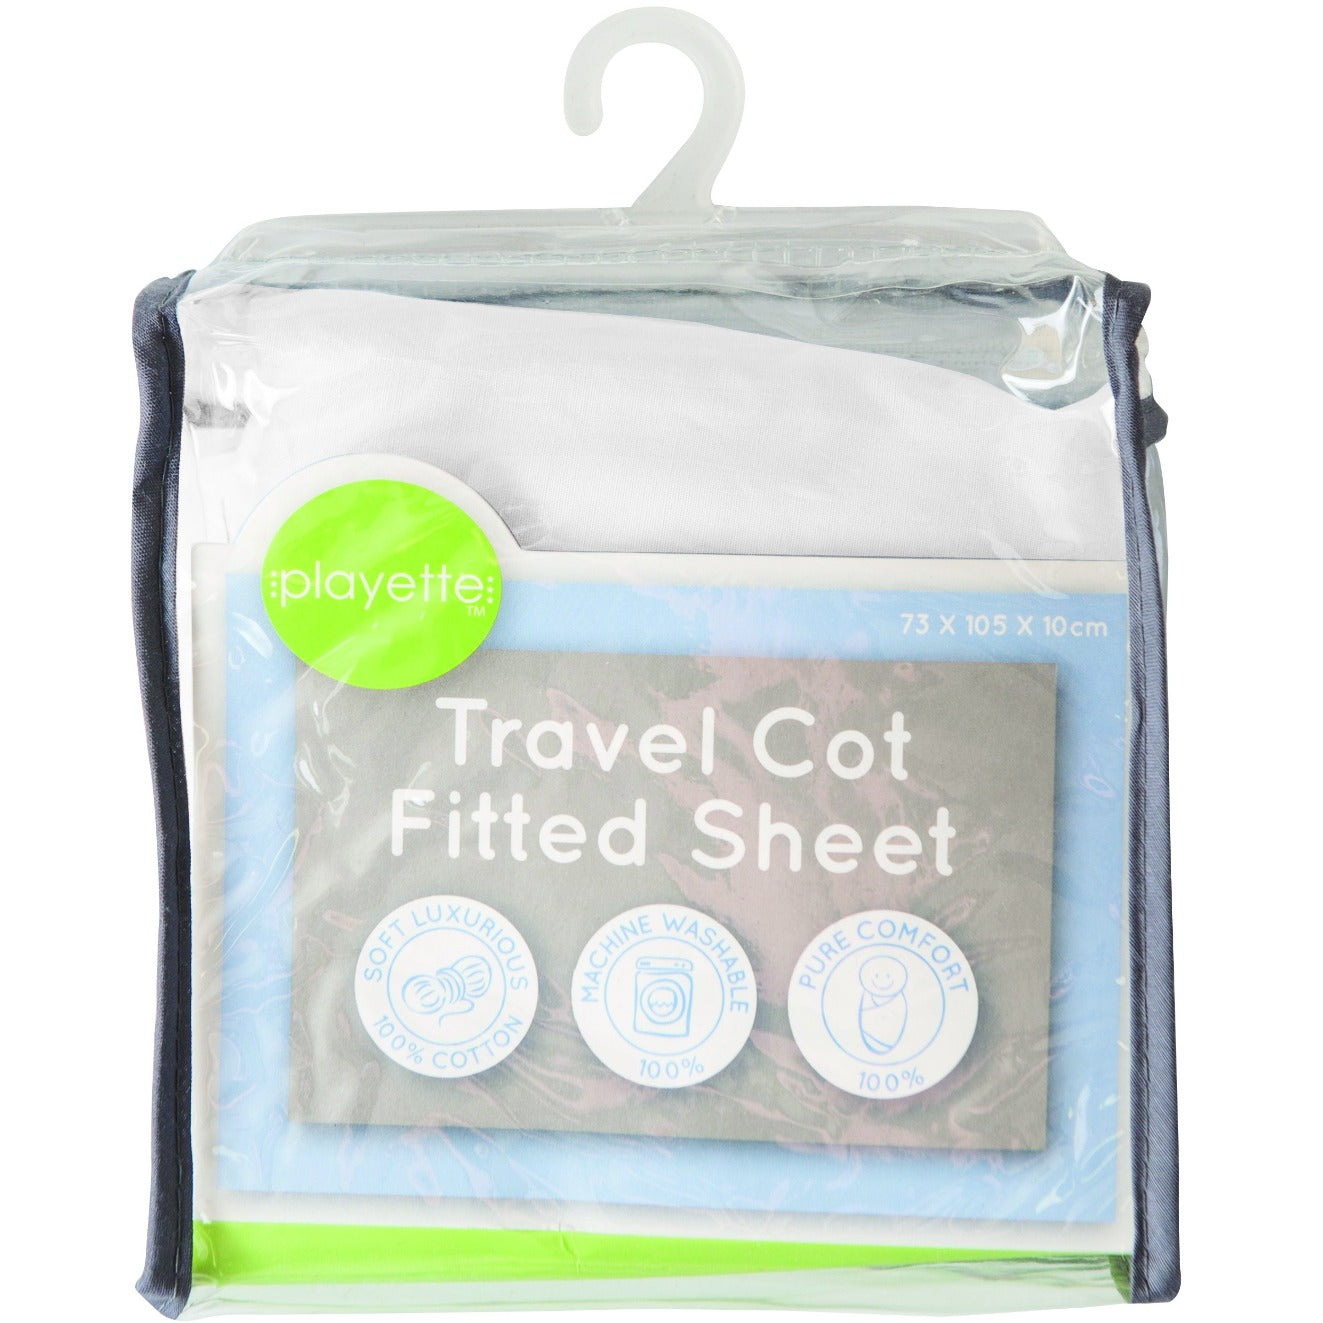 Playette Travel Cot Fitted Sheet - White